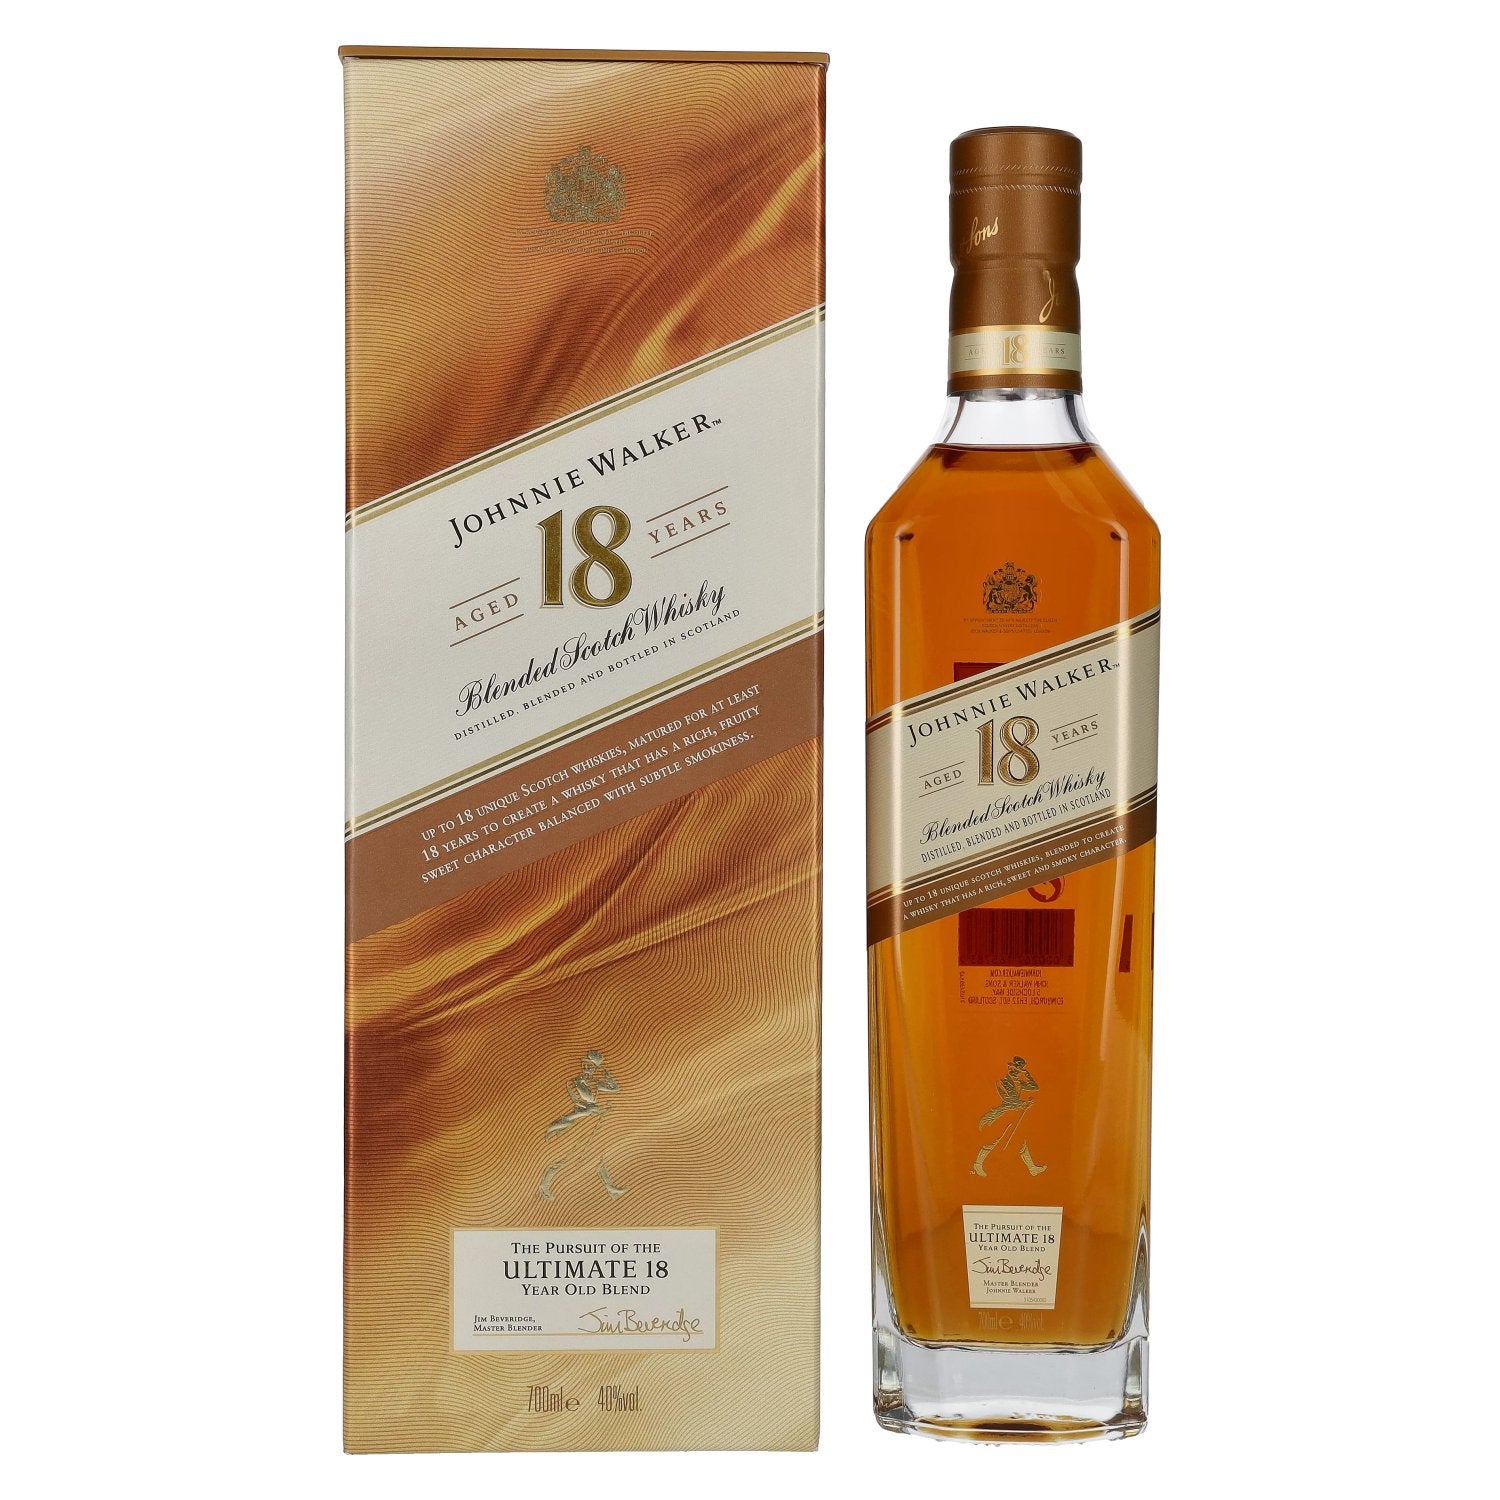 Johnnie Walker The Pursuit of the ULTIMATE 18 Years Old Blend 40% Vol. 0,7l in Giftbox